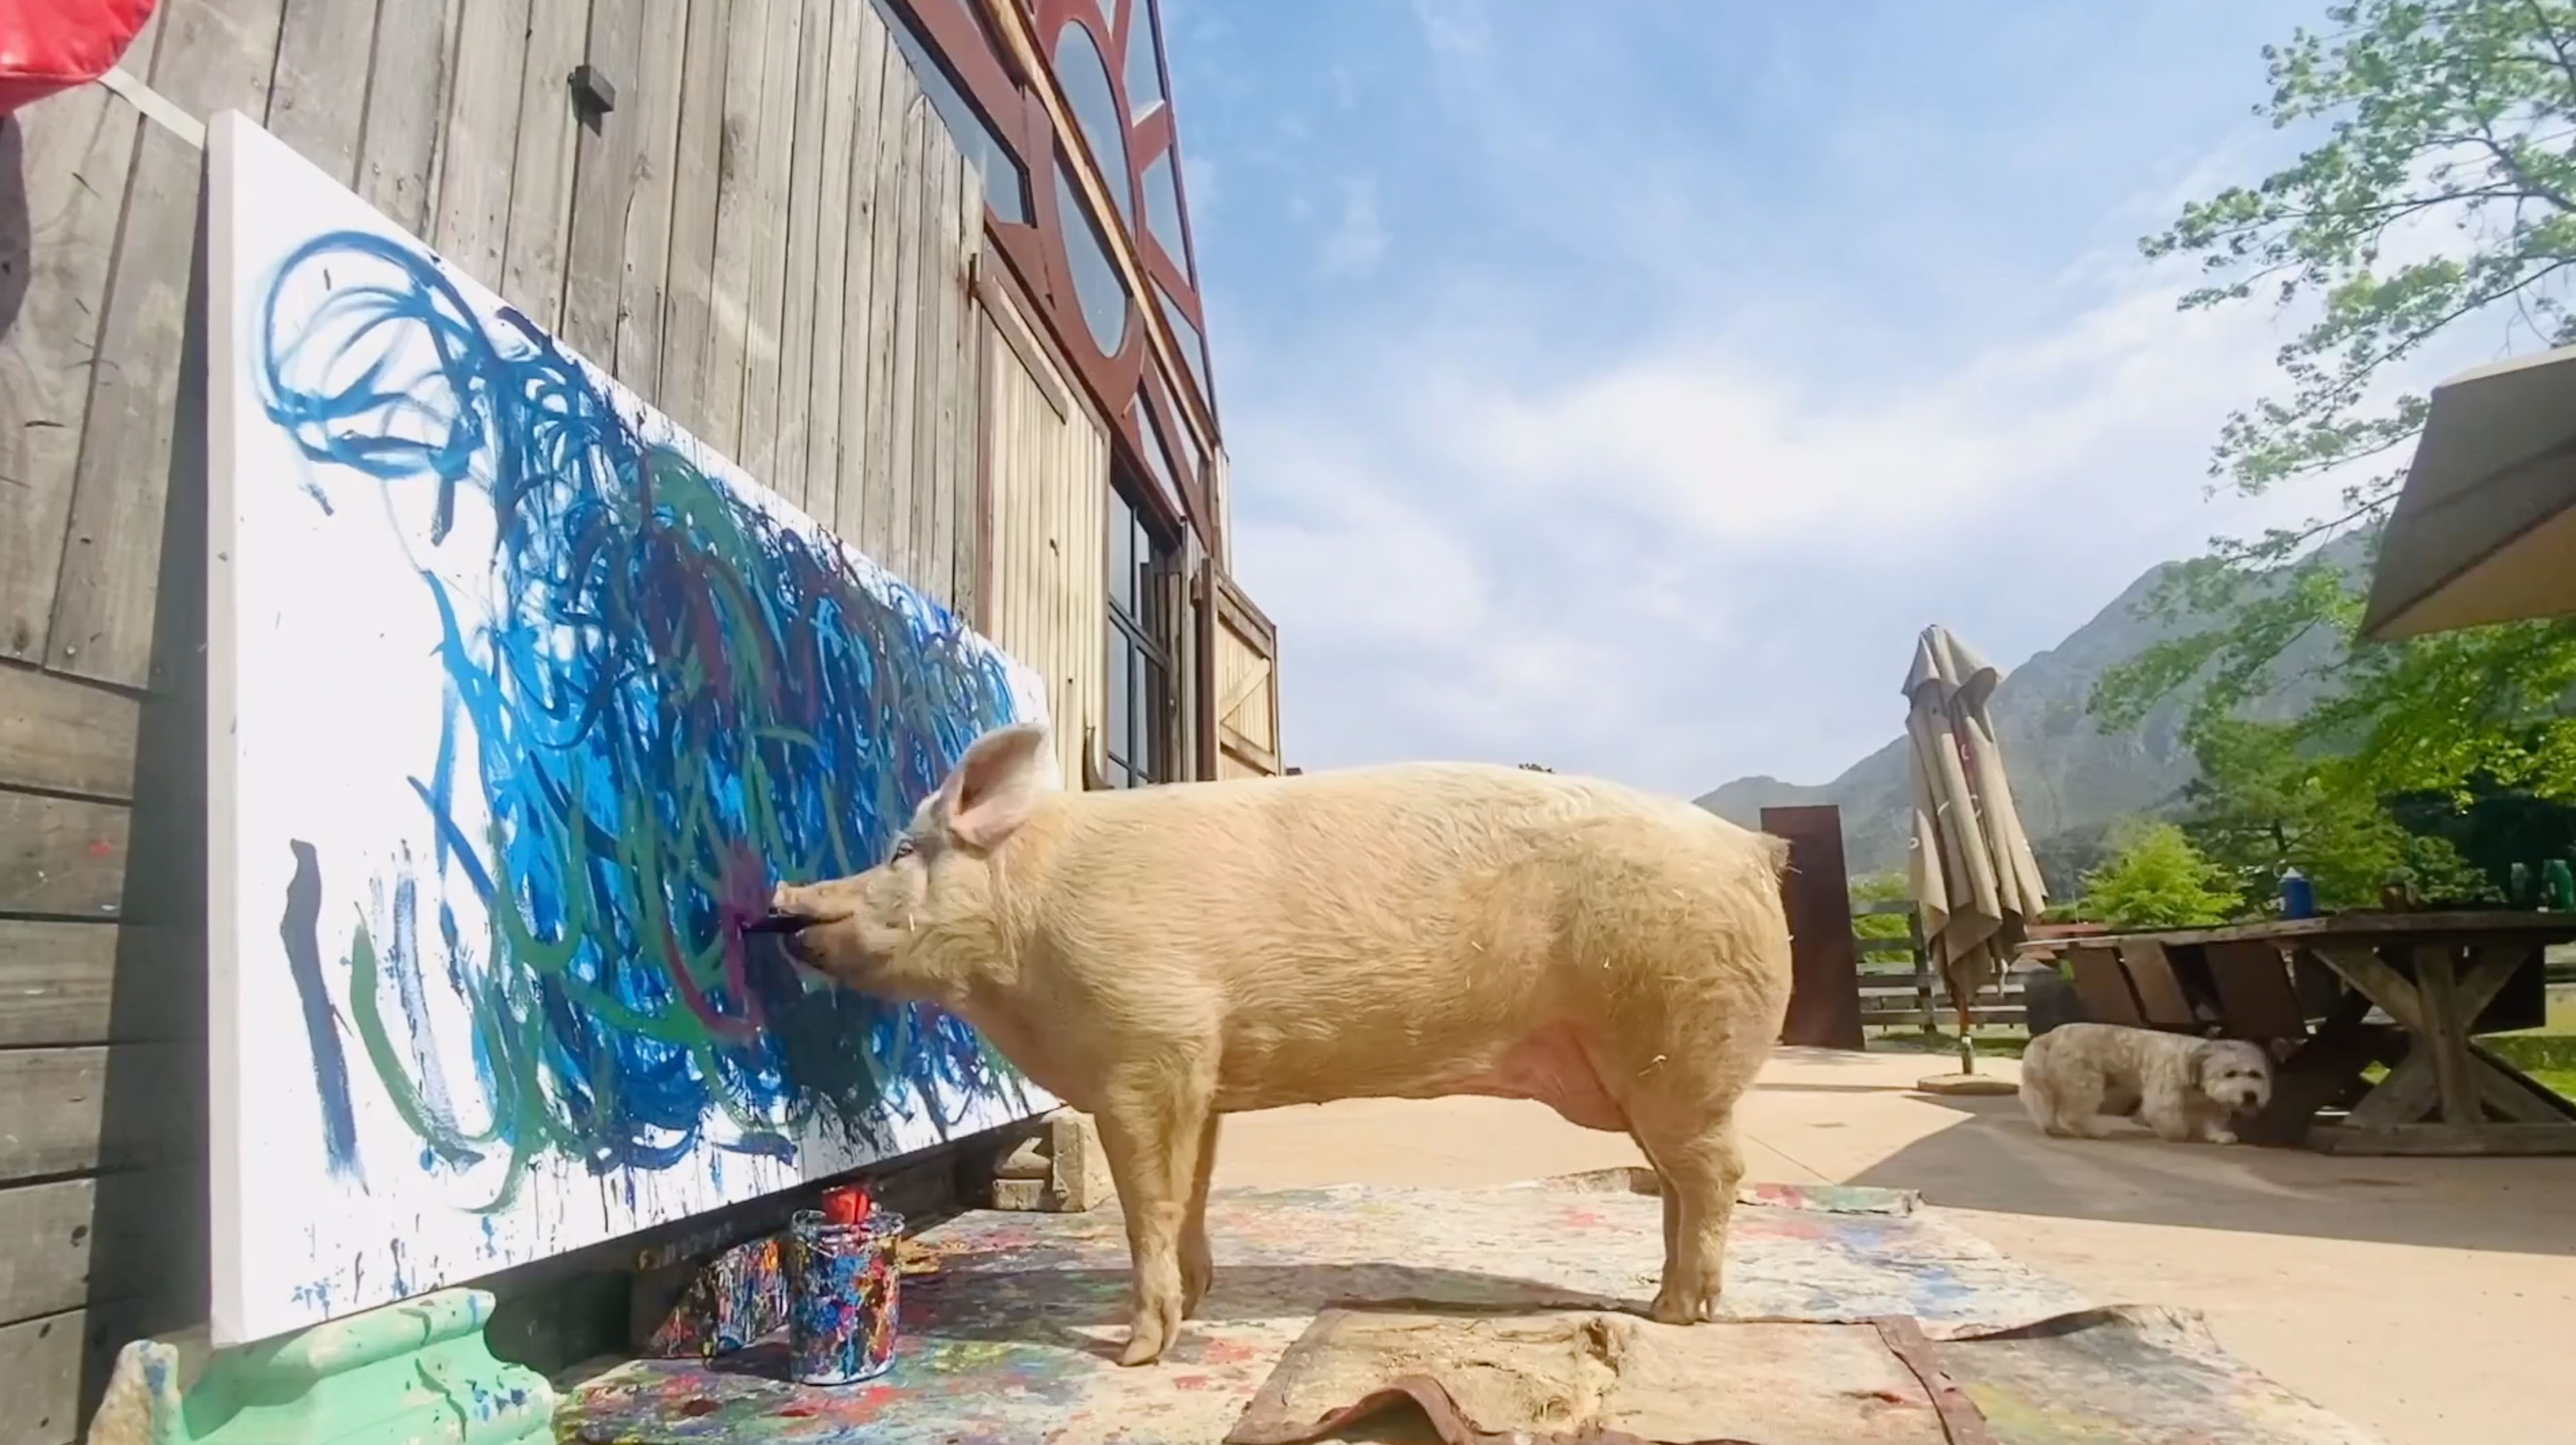 PIG'S ABSTRACT ARTWORK SELLS FOR A WORLD RECORD £20K